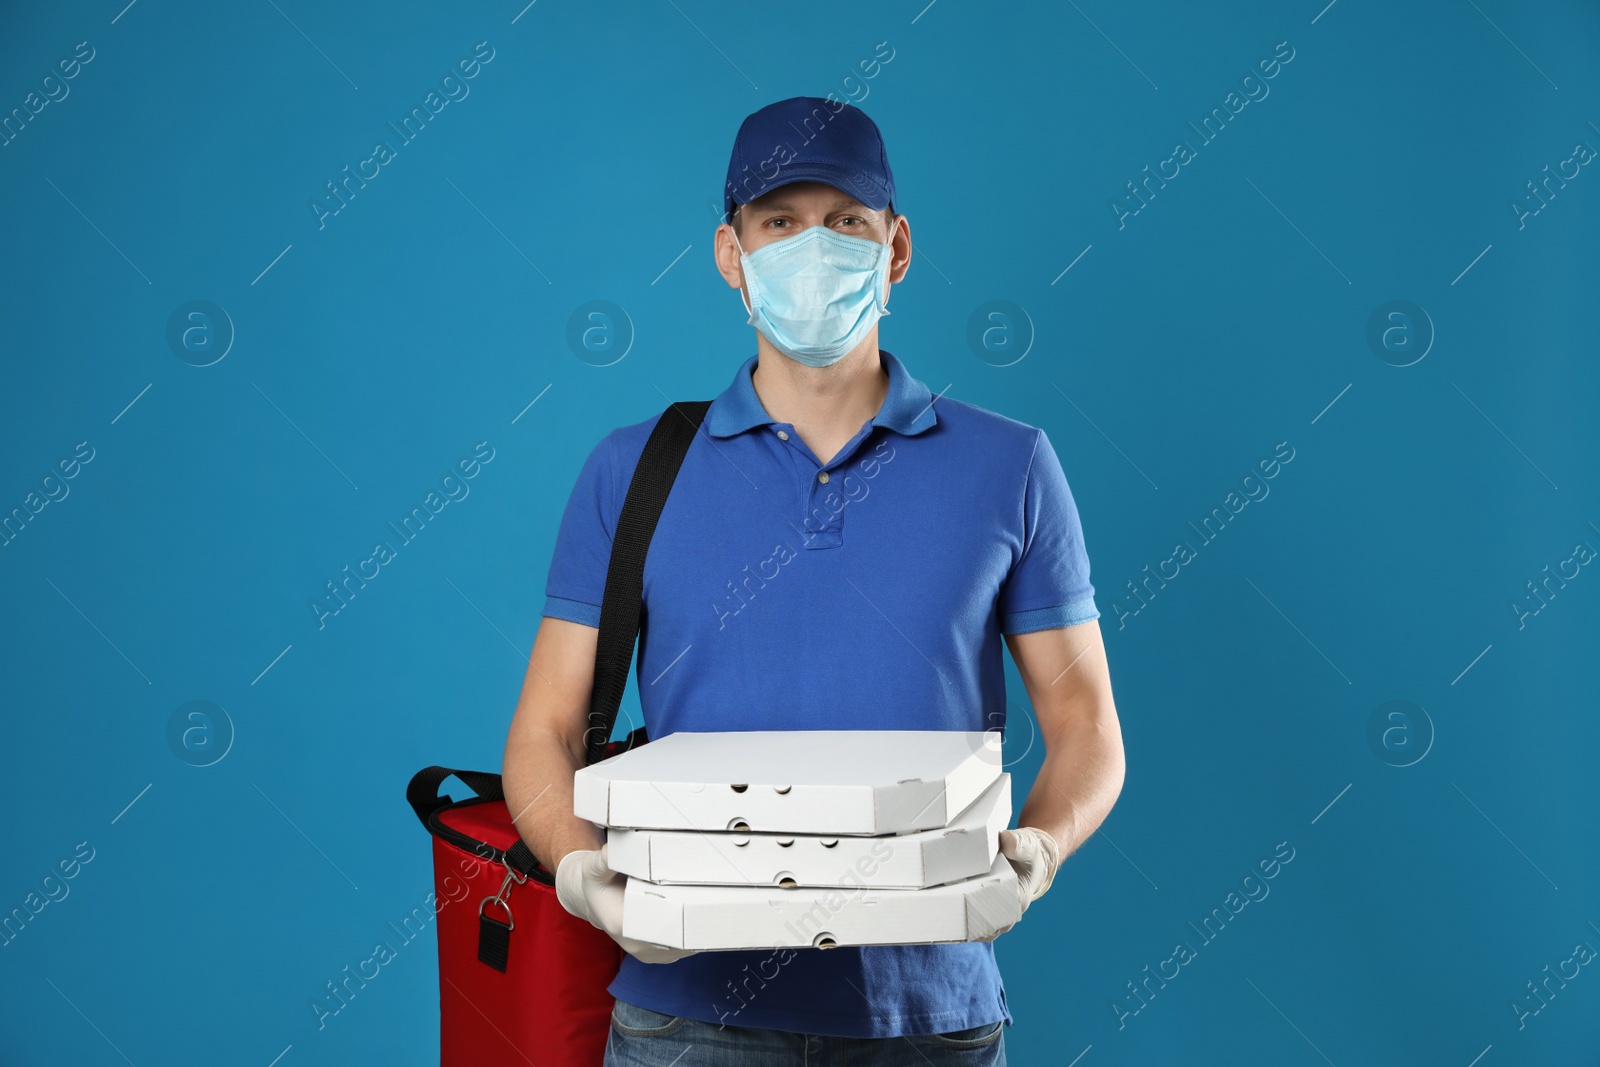 Photo of Courier in protective mask and gloves holding pizza boxes on blue background. Food delivery service during coronavirus quarantine